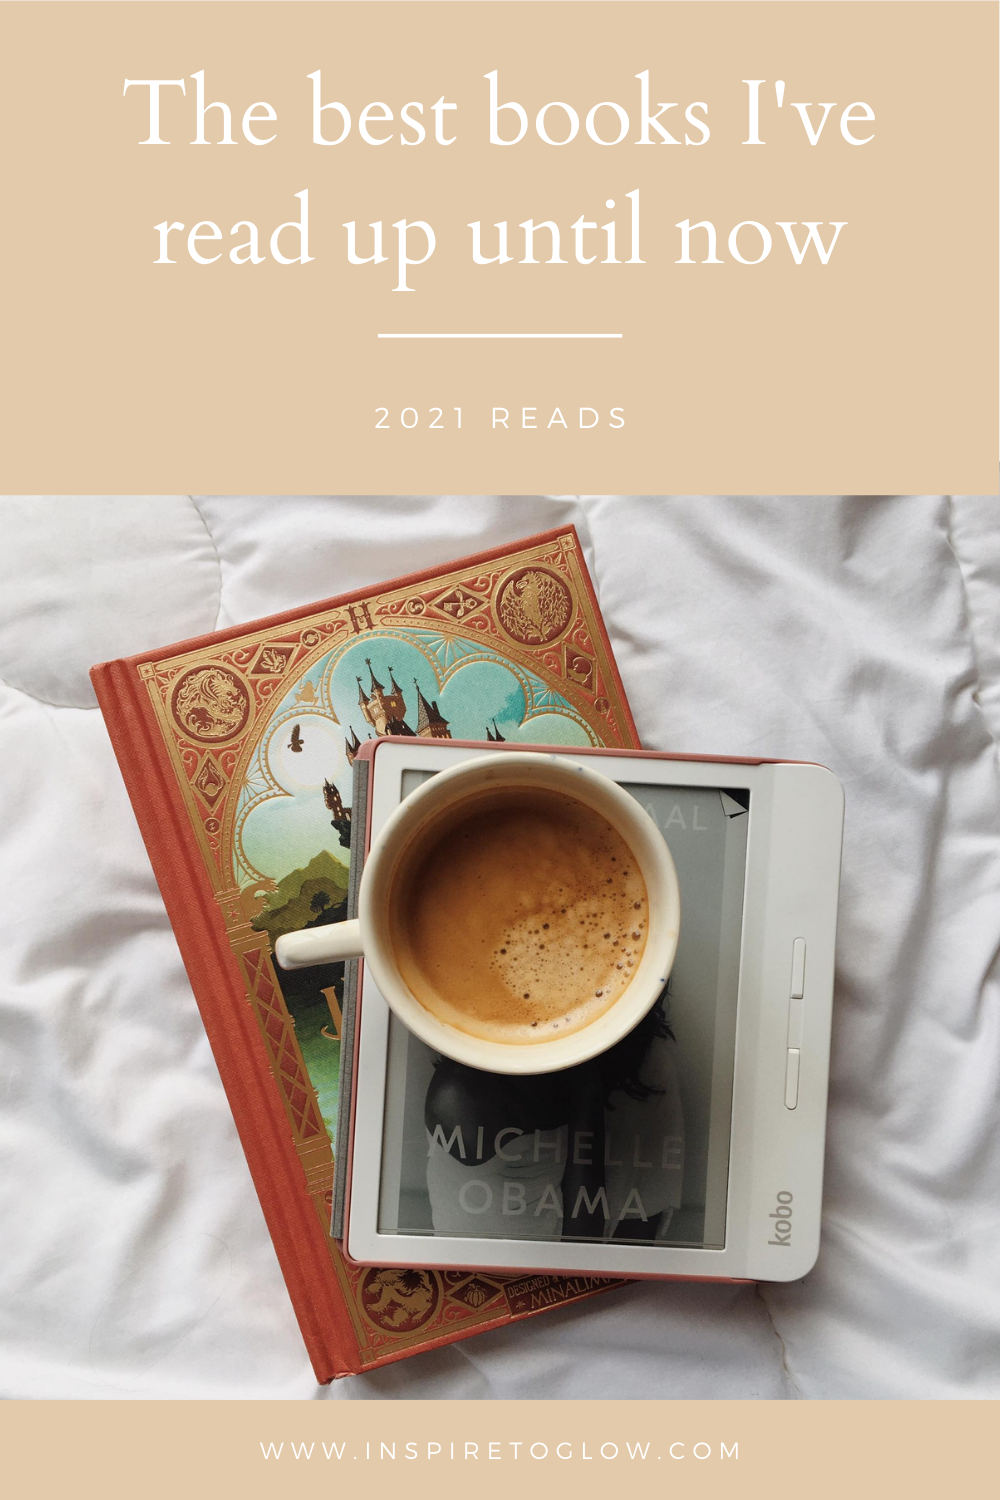 Pinterest Pin - Save this blog post for later - The Best Books I've Read Up Until Now - 2021 Reads - Inspire to Glow Lifestyle Blog - Book recommendations - Fiction & Non Fiction